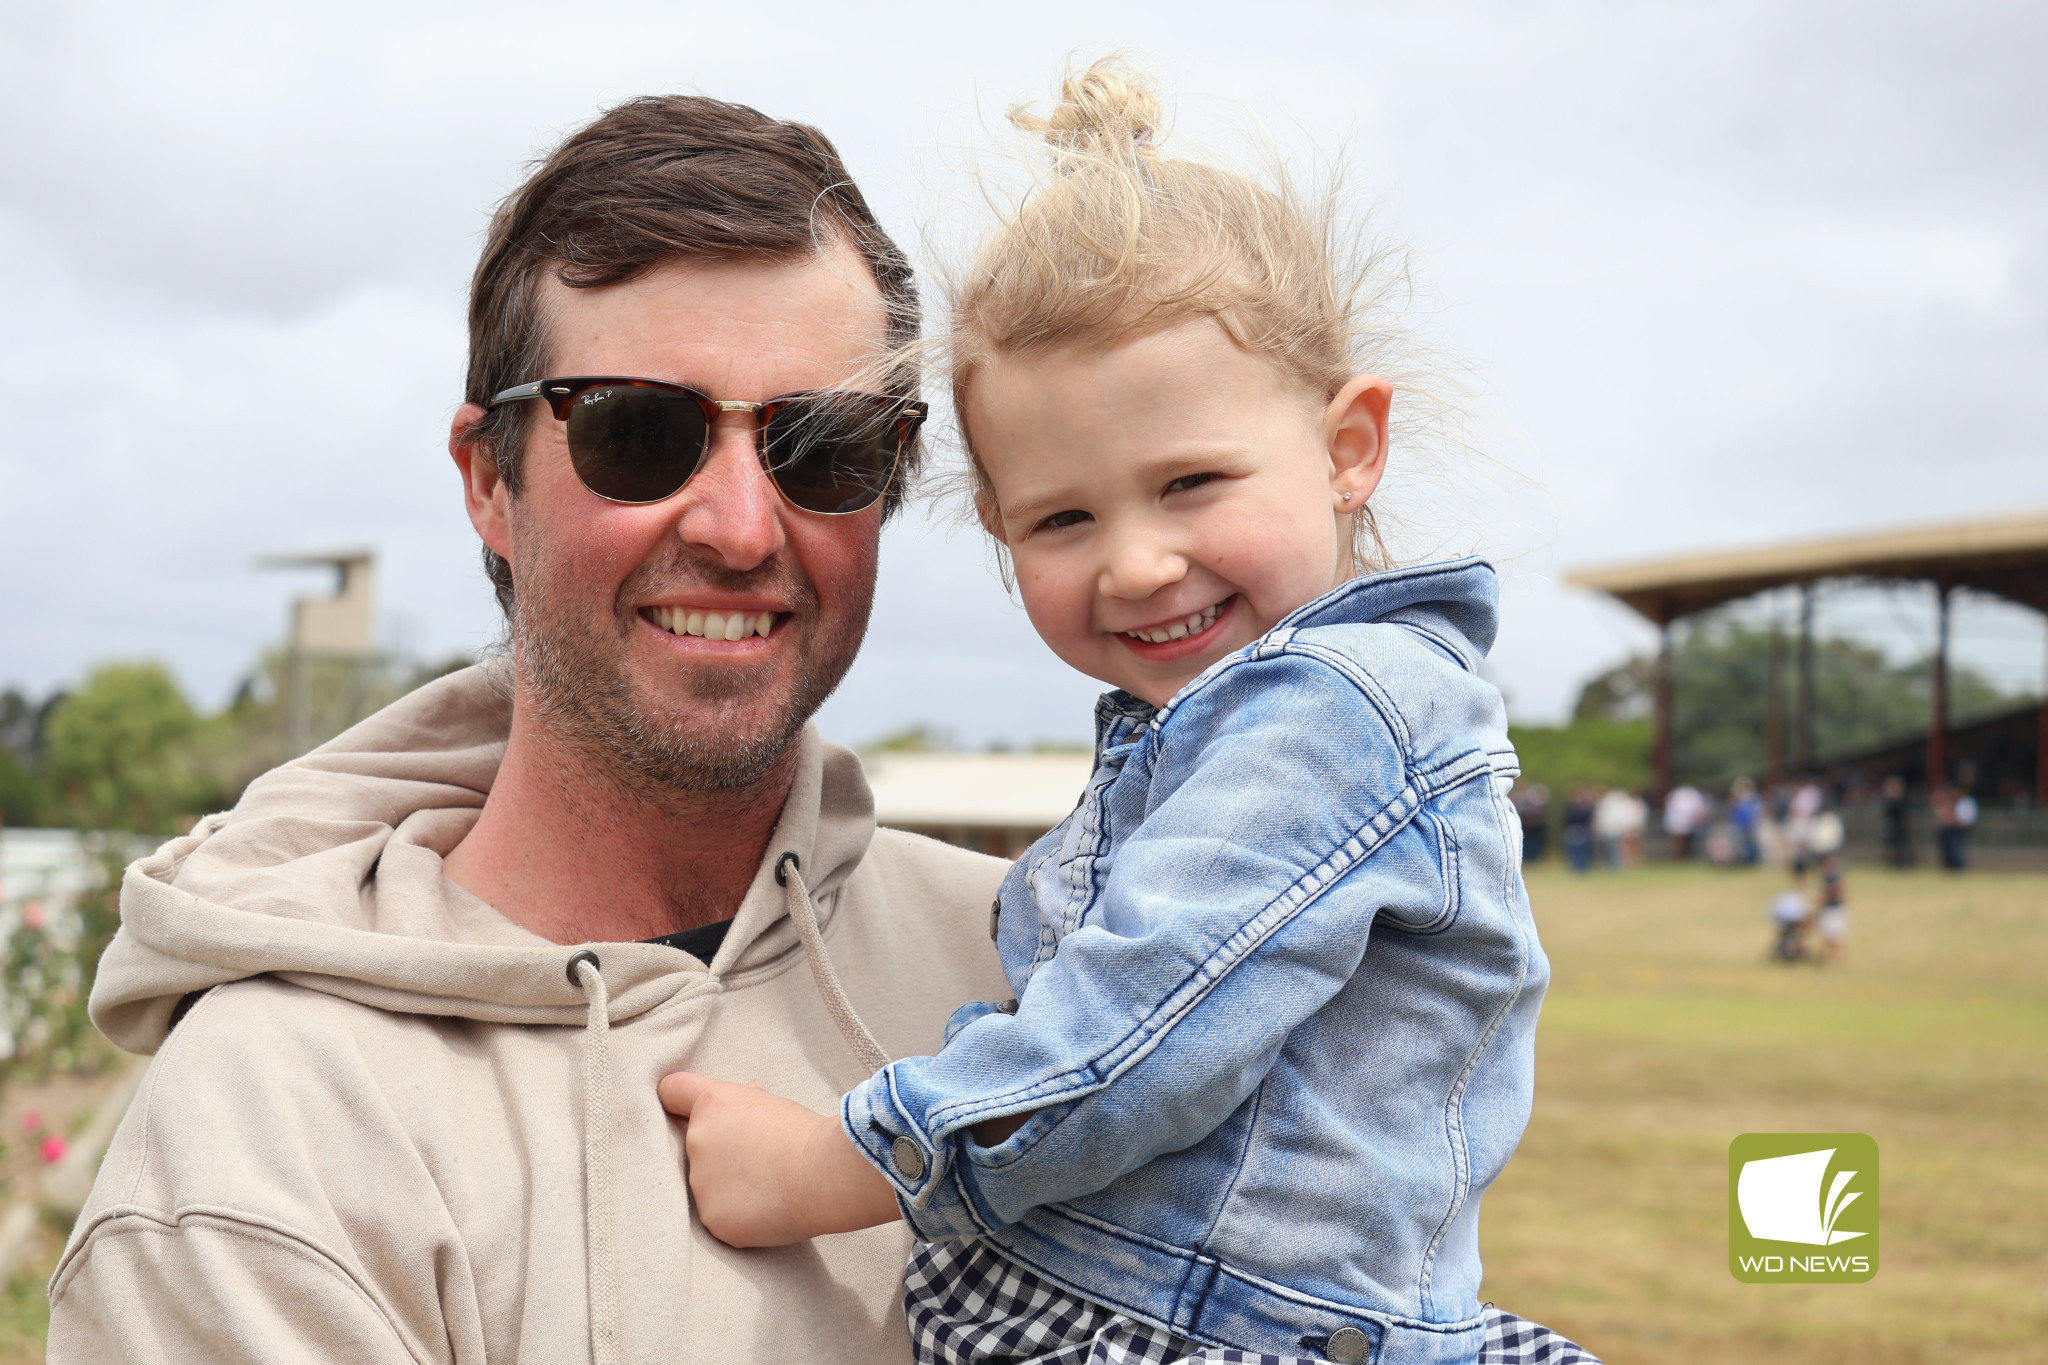 Jonathon and Mai Gleeson were among those enjoying a day at the track as part of the Terang and District Racing Club’s Farmers Day Out races.